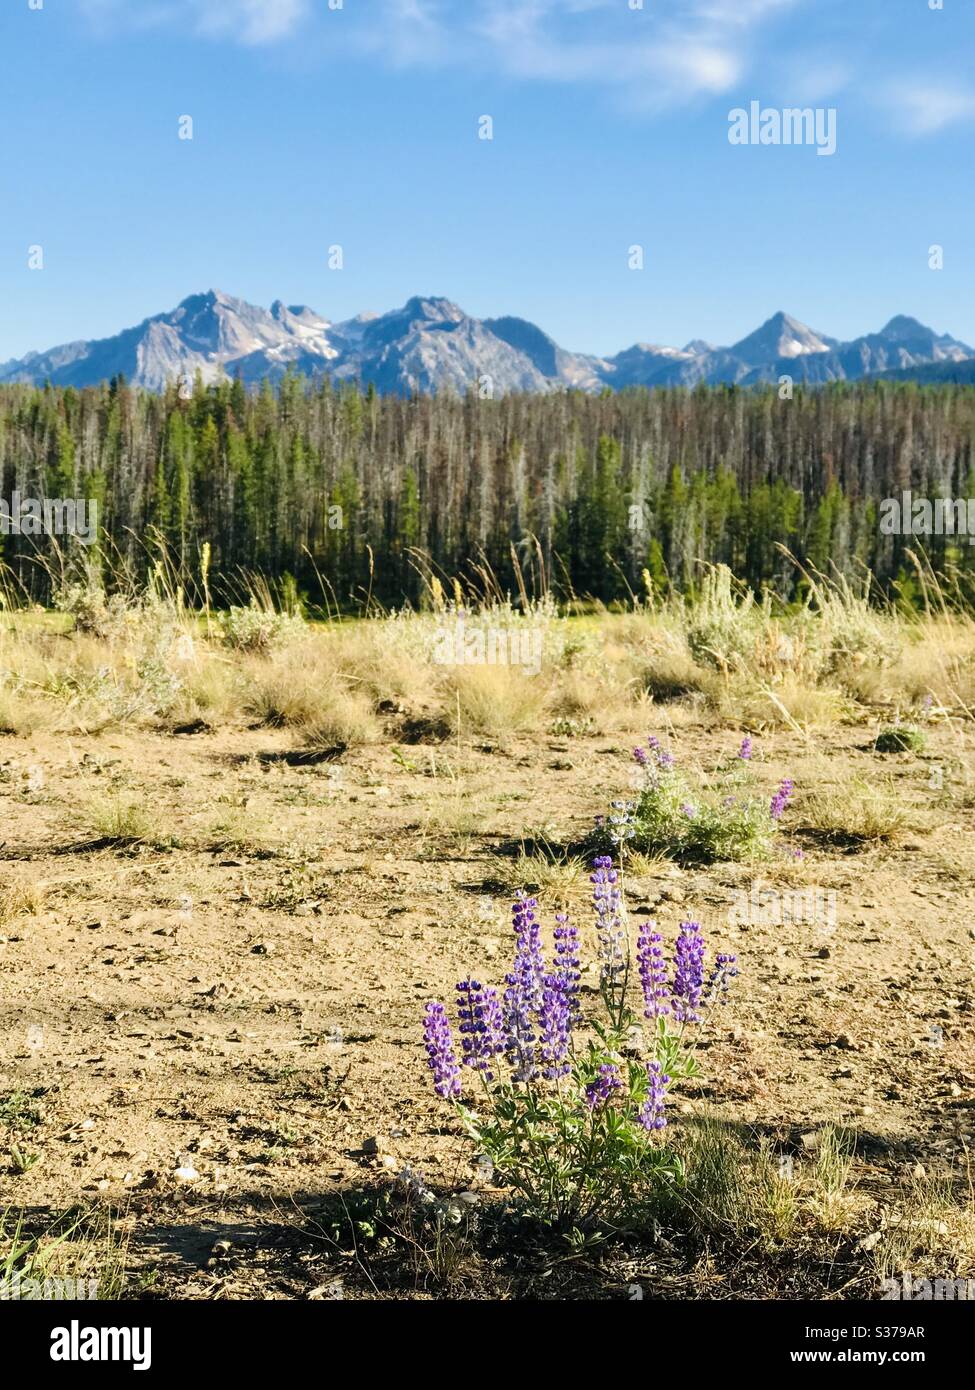 Purple wild flowers in the foreground of scenic mountains and pine trees. Stock Photo